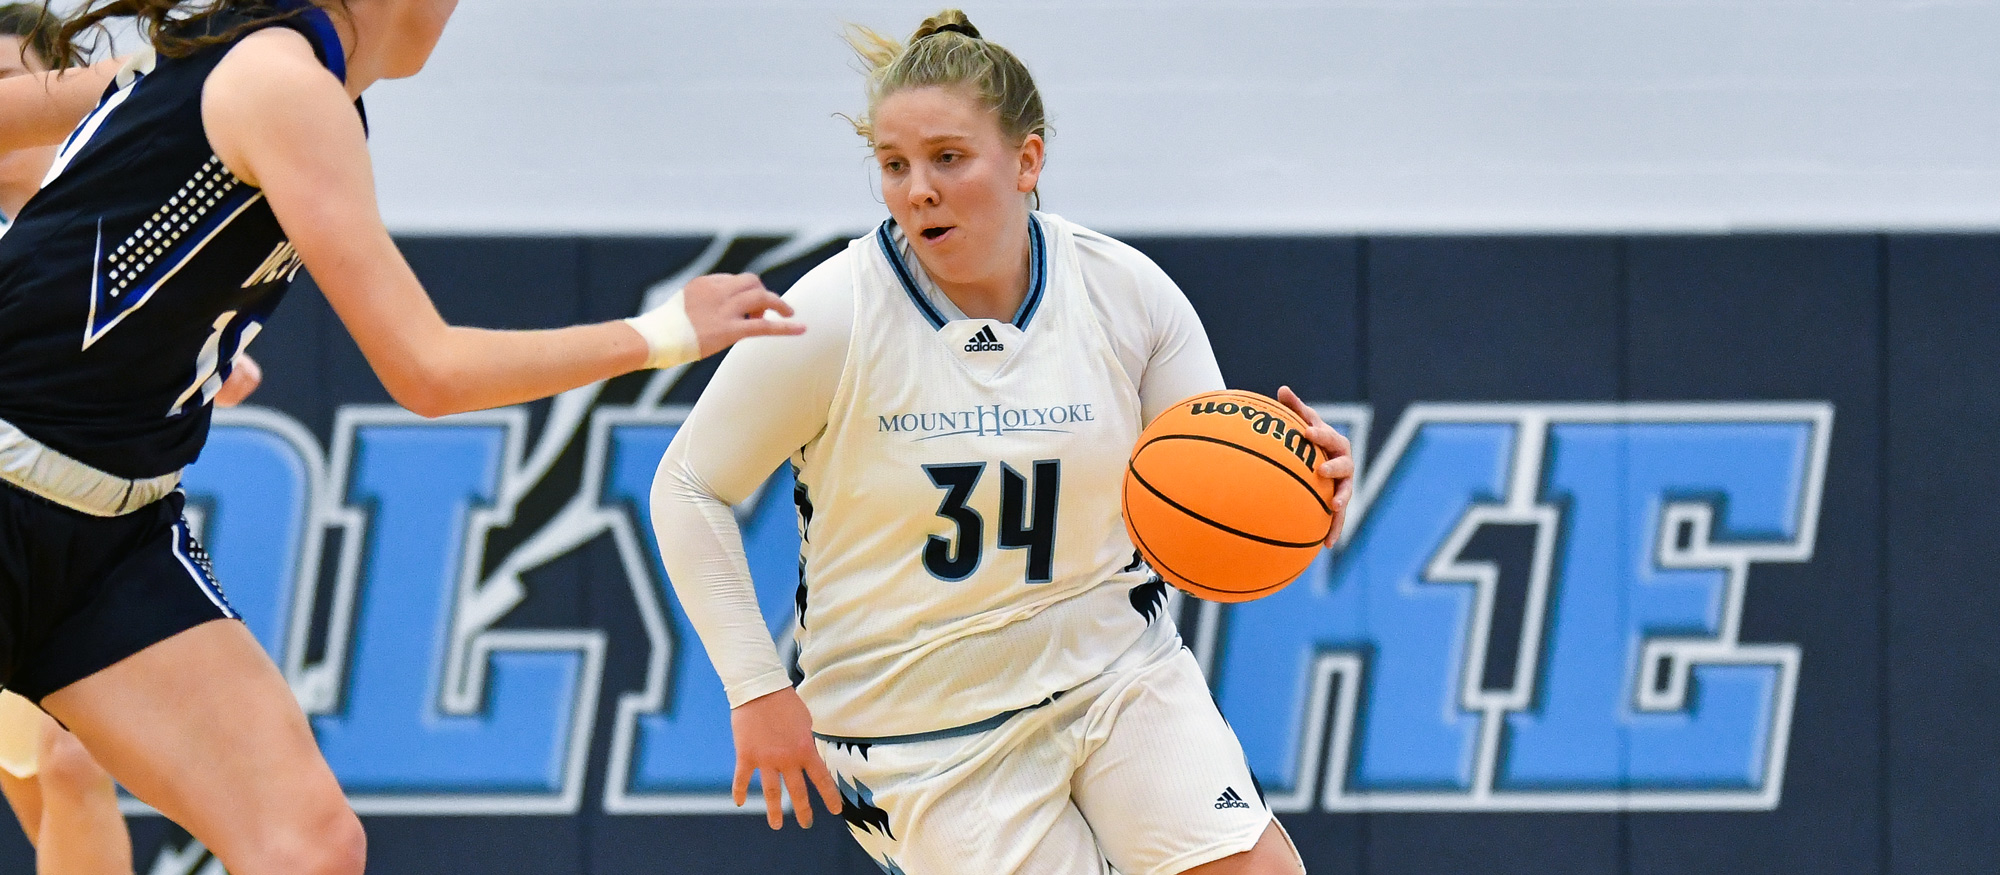 Cal McGonagle had her third double-double of the season with 13 points and 11 rebounds against Emerson on Jan. 14, 2023. (RJB Sports file photo)